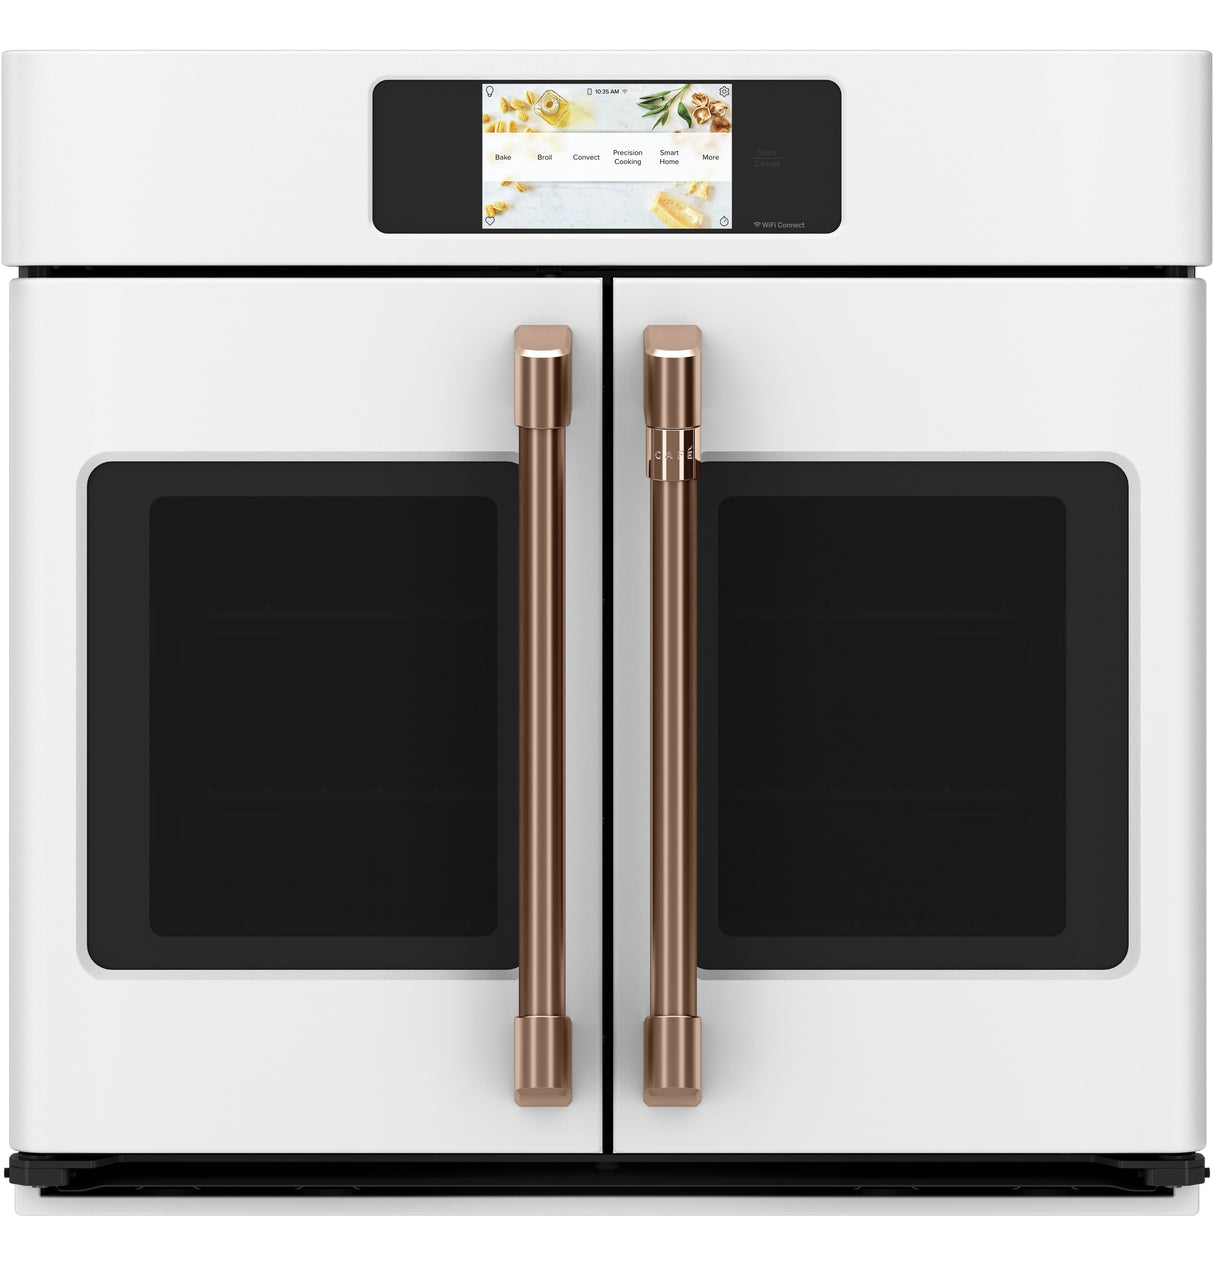 Caf(eback)(TM) Professional Series 30" Smart Built-In Convection French-Door Single Wall Oven - (CTS90FP4NW2)